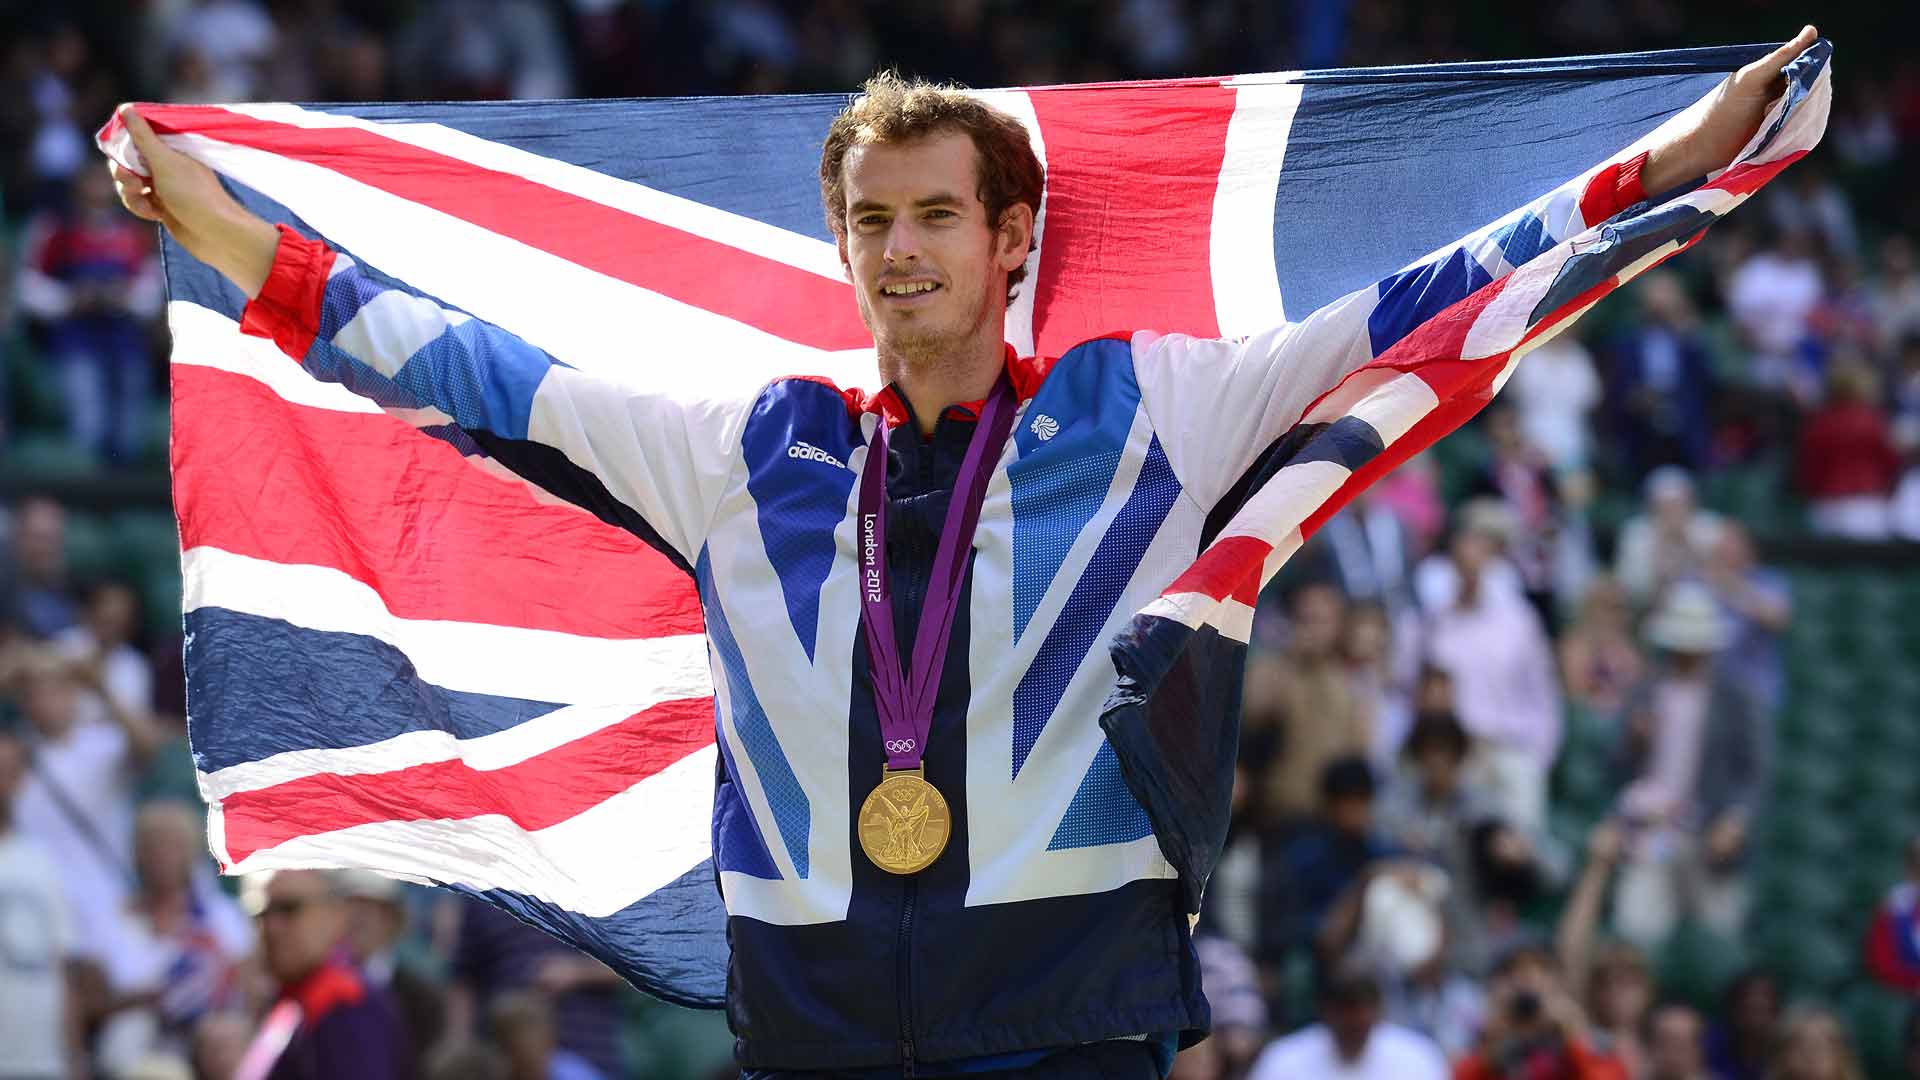 a href='https://www.atptour.com/en/players/andy-murray/mc10/overview'Andy Murray/a